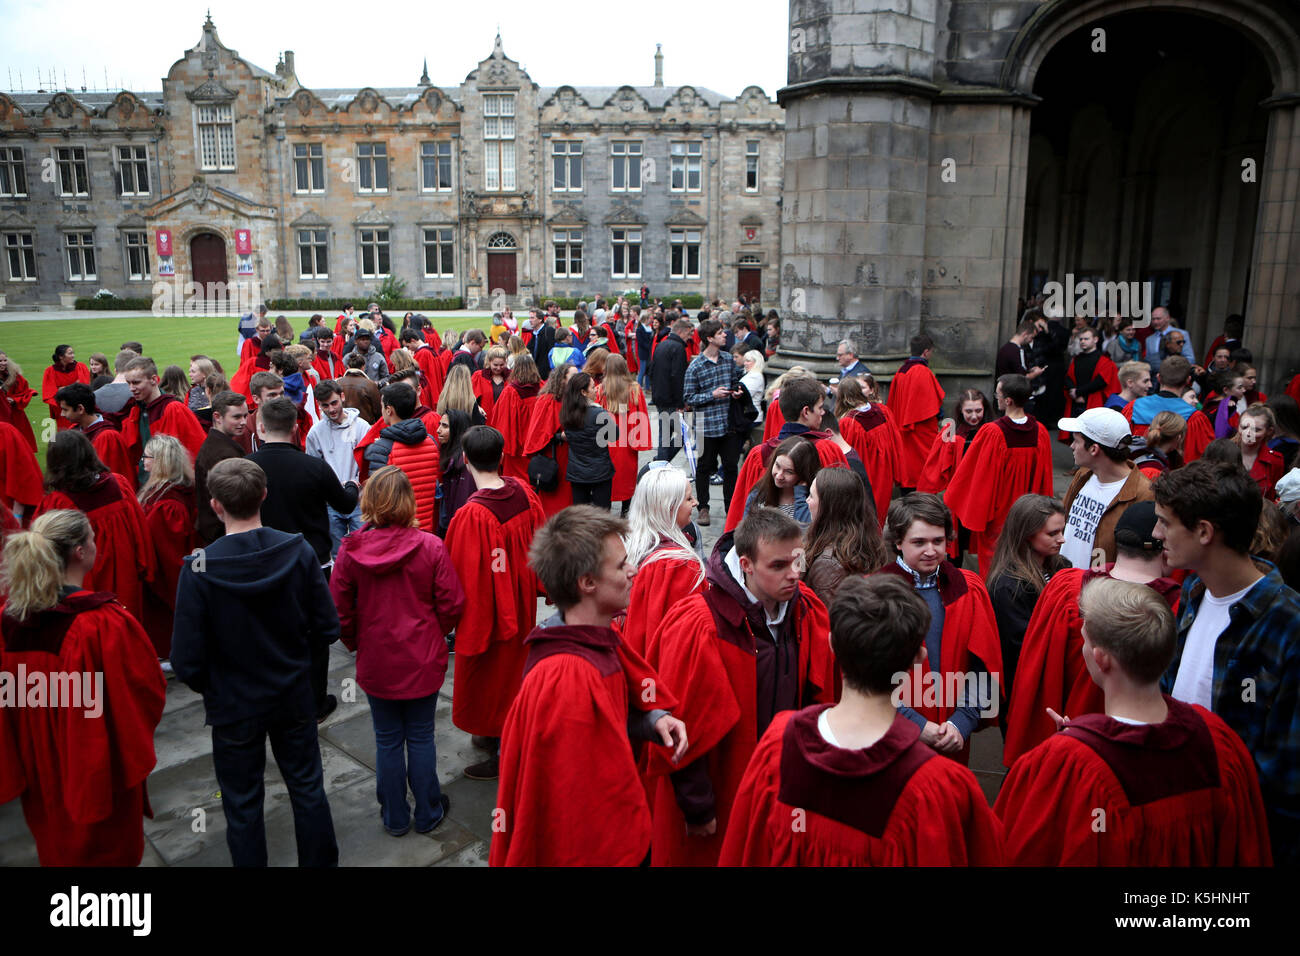 New students at the University of St Andrews congregate in St Salvator's College quad before taking part in the traditional Pier Walk along the harbour walls of St Andrews before the start of the new academic year. The Martinmas Semester starts on Monday September 11, 2017, for all students. Stock Photo